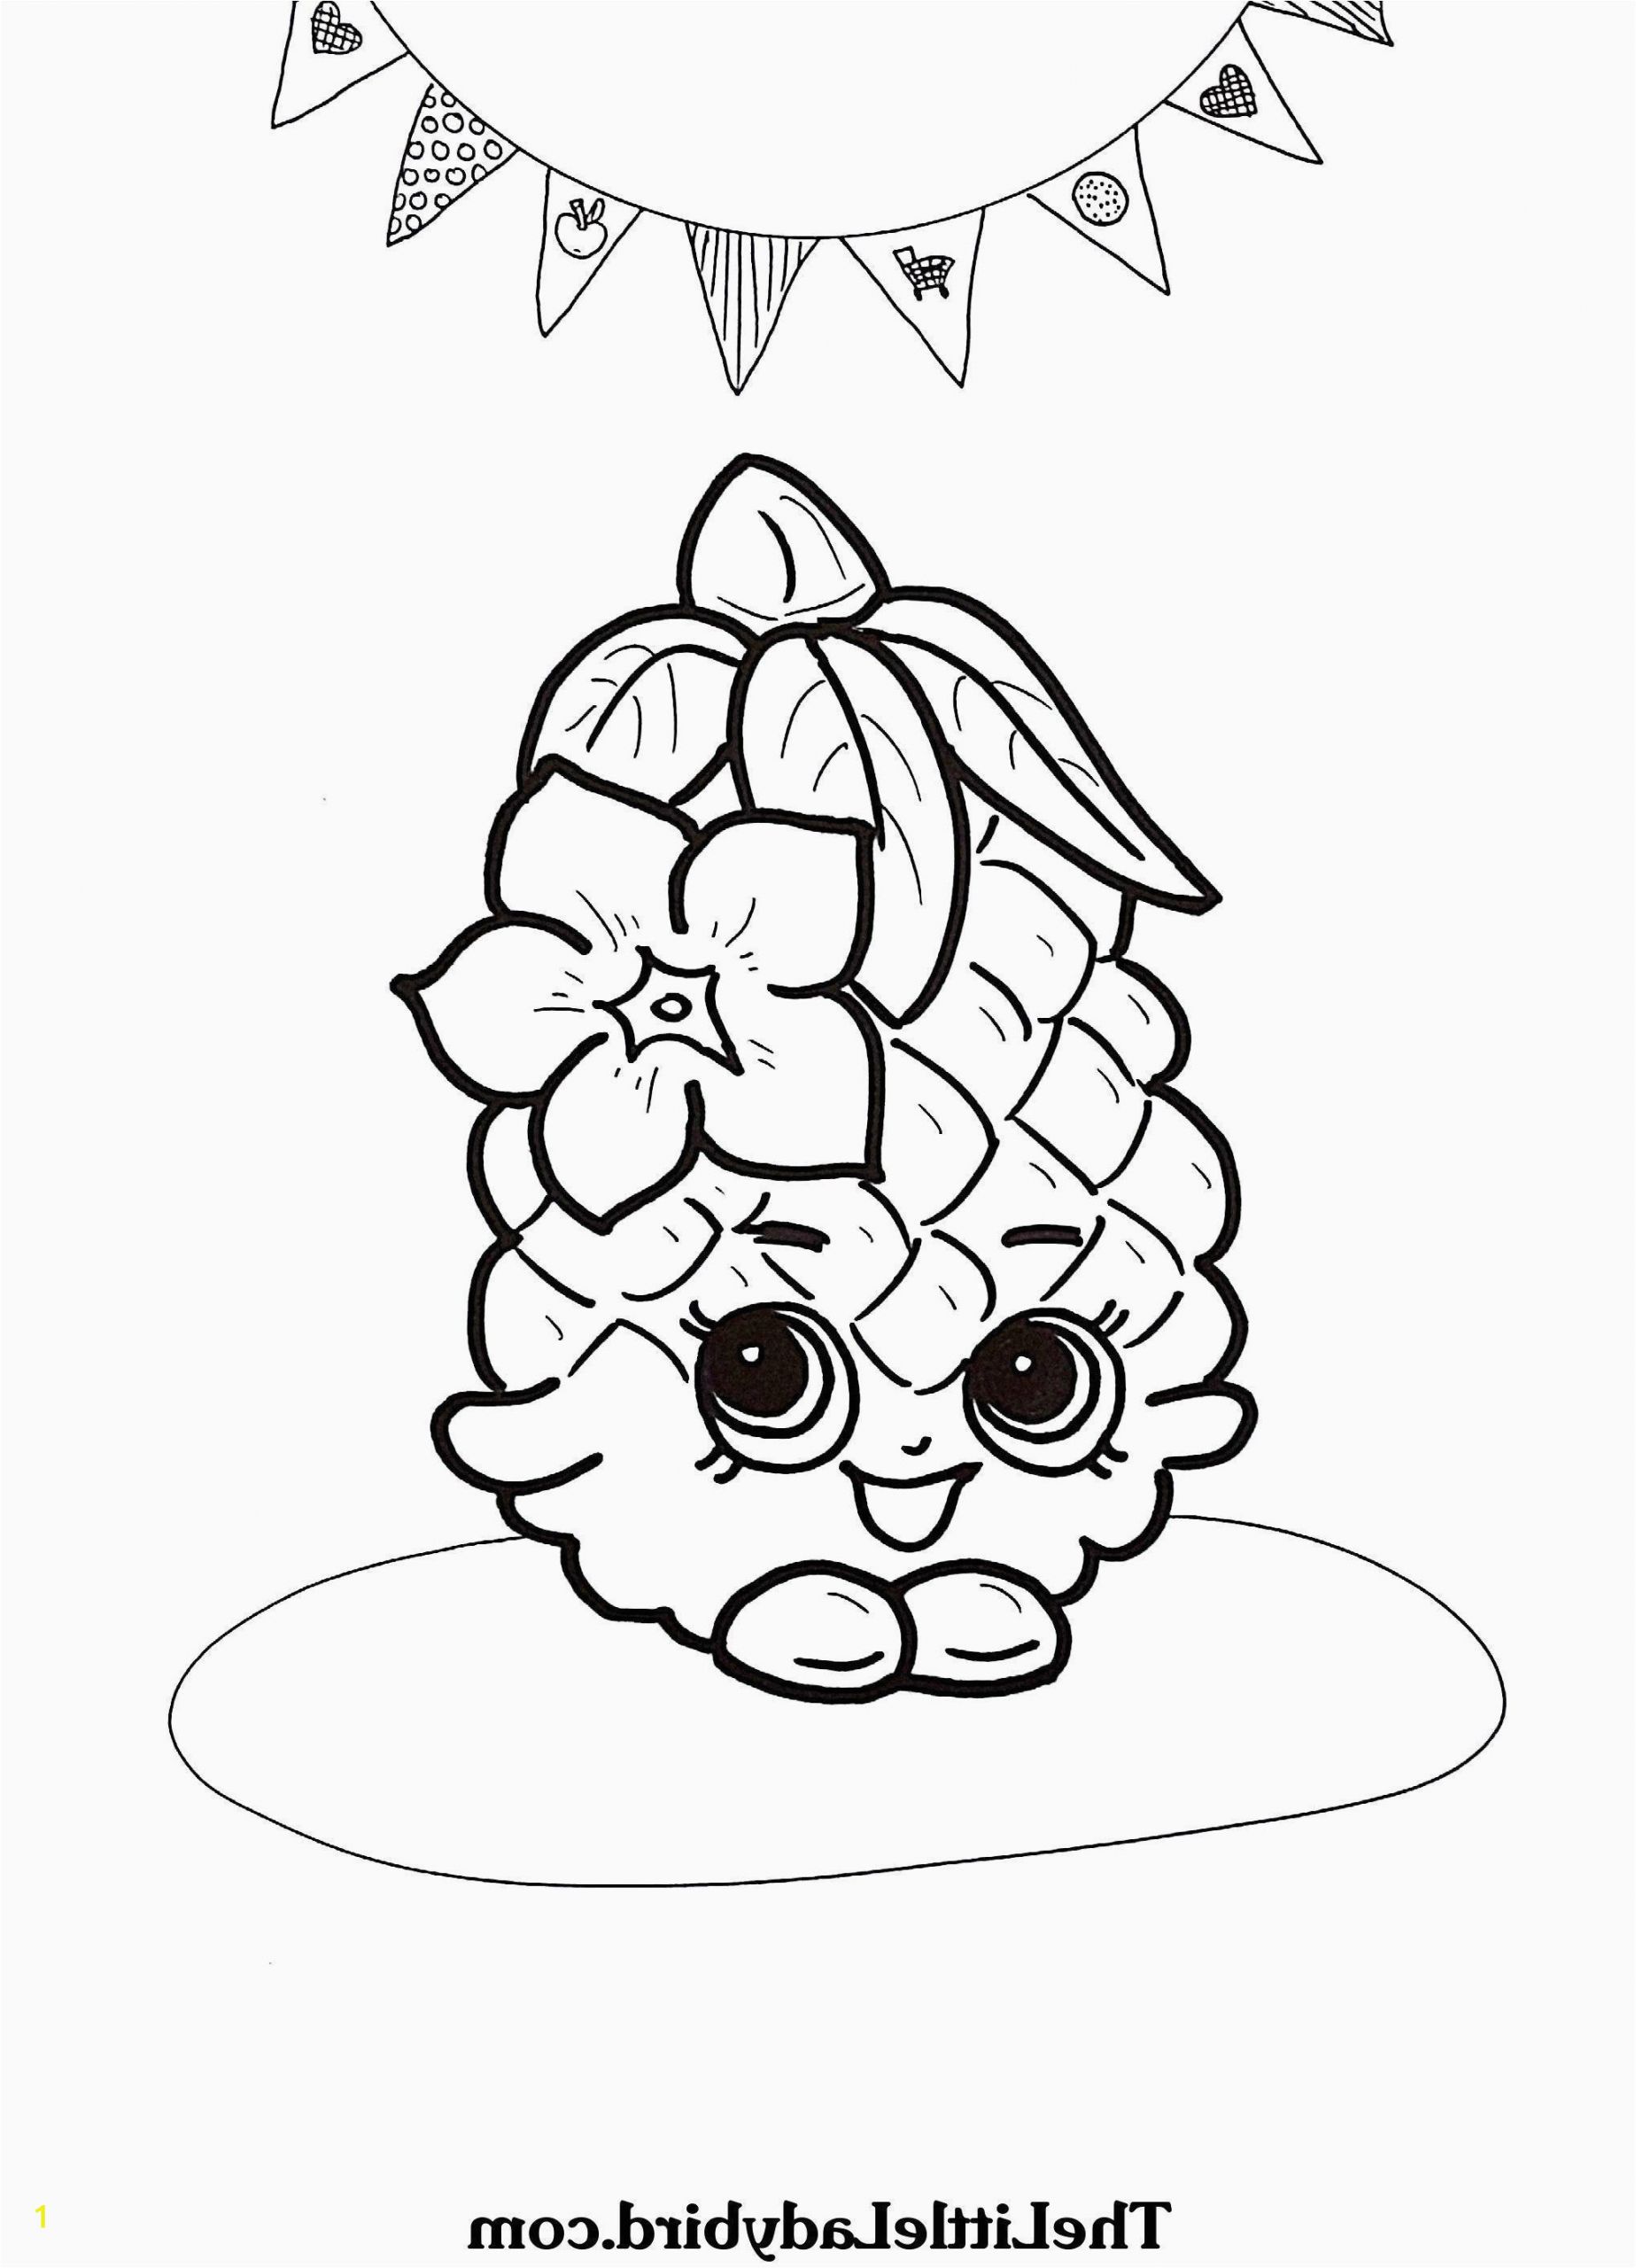 Big Pokemon Coloring Pages 28 Luxury Image Valentines Free Coloring Page